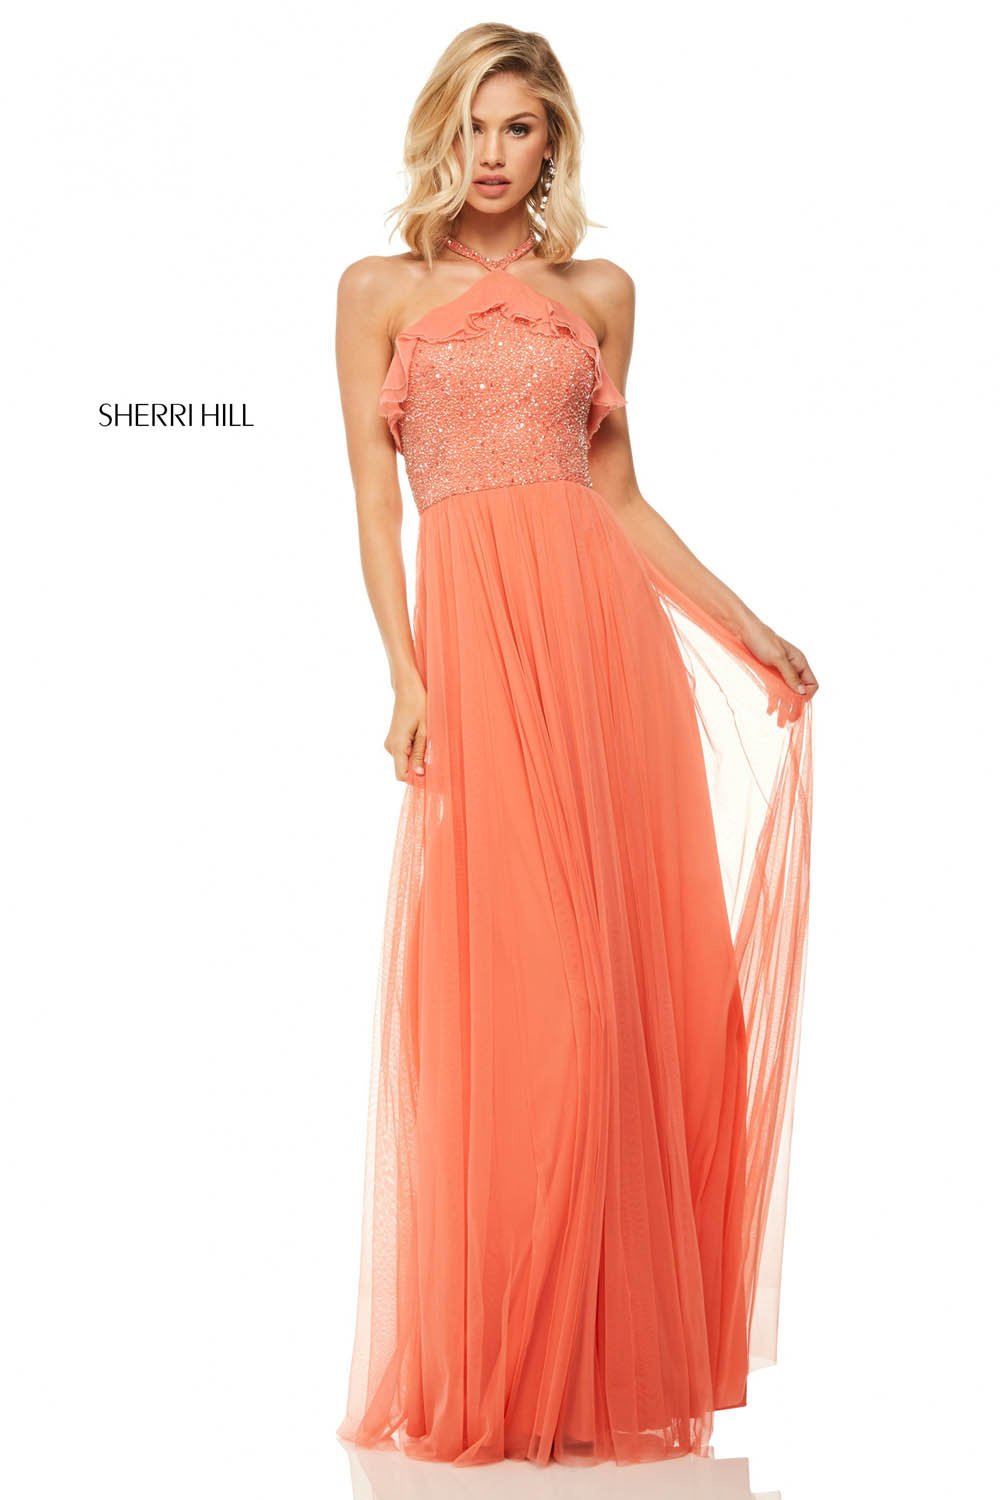 Sherri Hill 52797 dress images in these colors: Black, Red, Lilac, Yellow, Nude, Ivory, Coral.